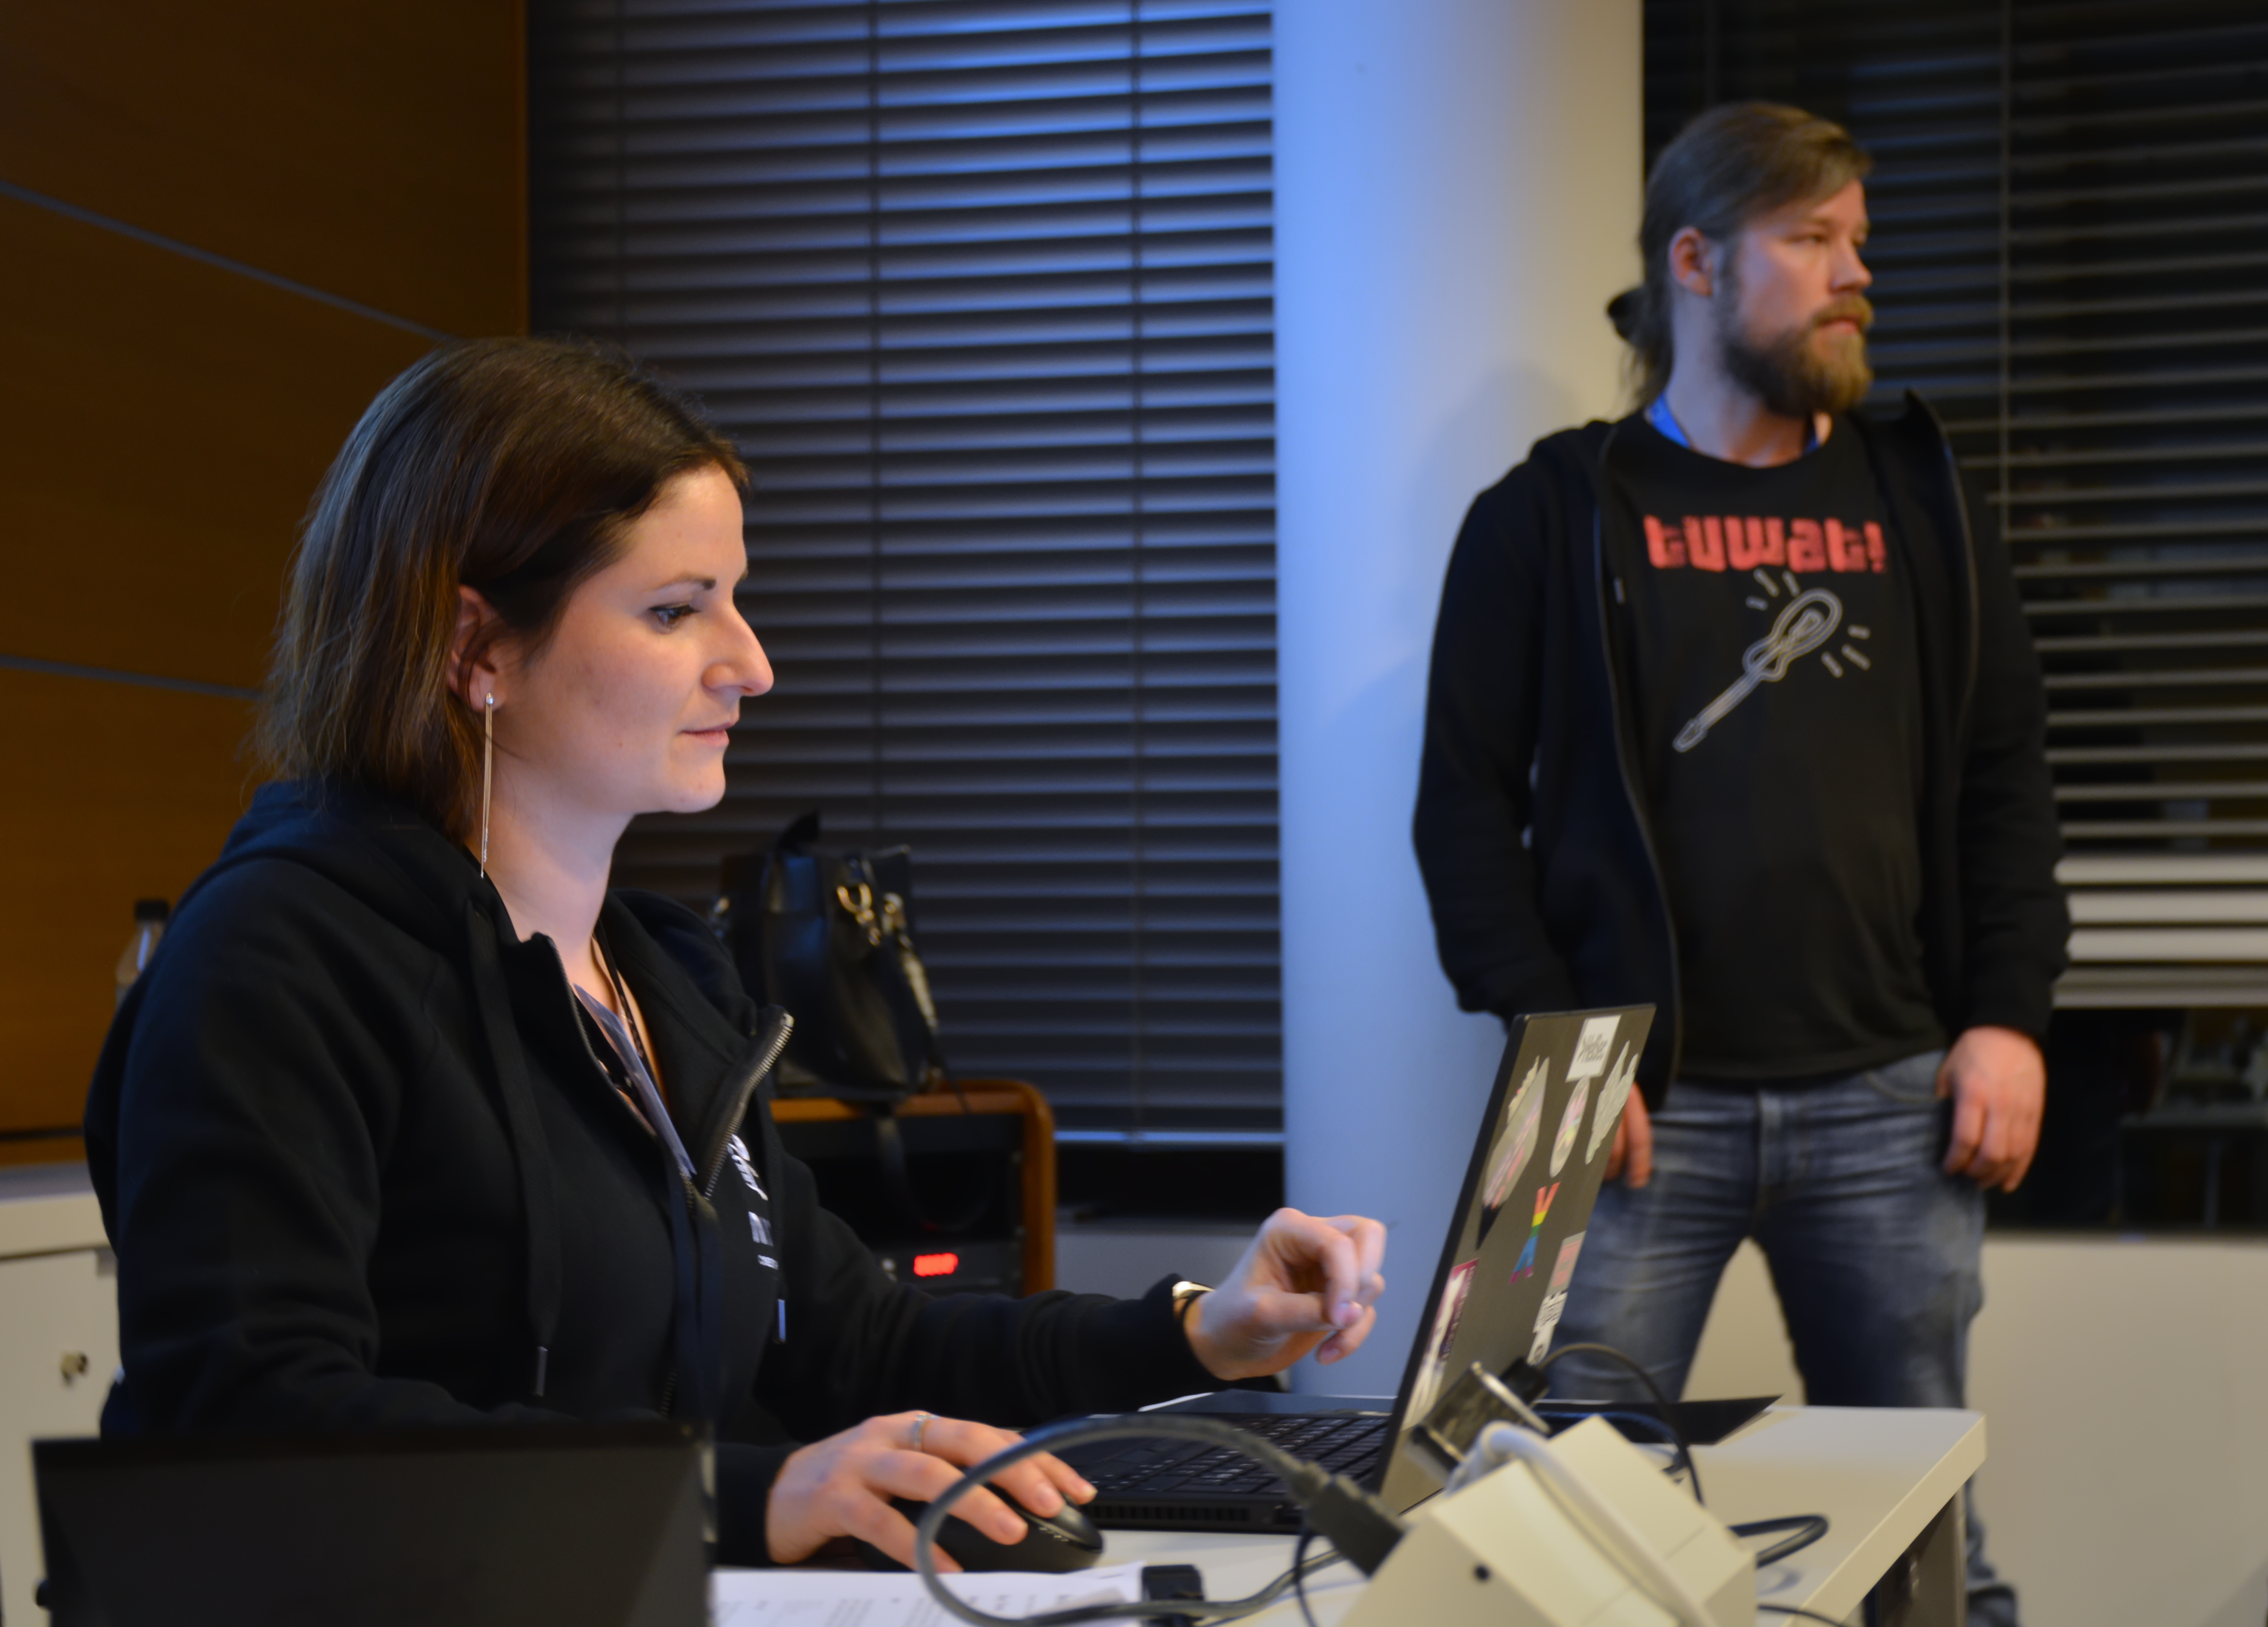 Flavia and Antti are demonstrating Splunk usage for the participants